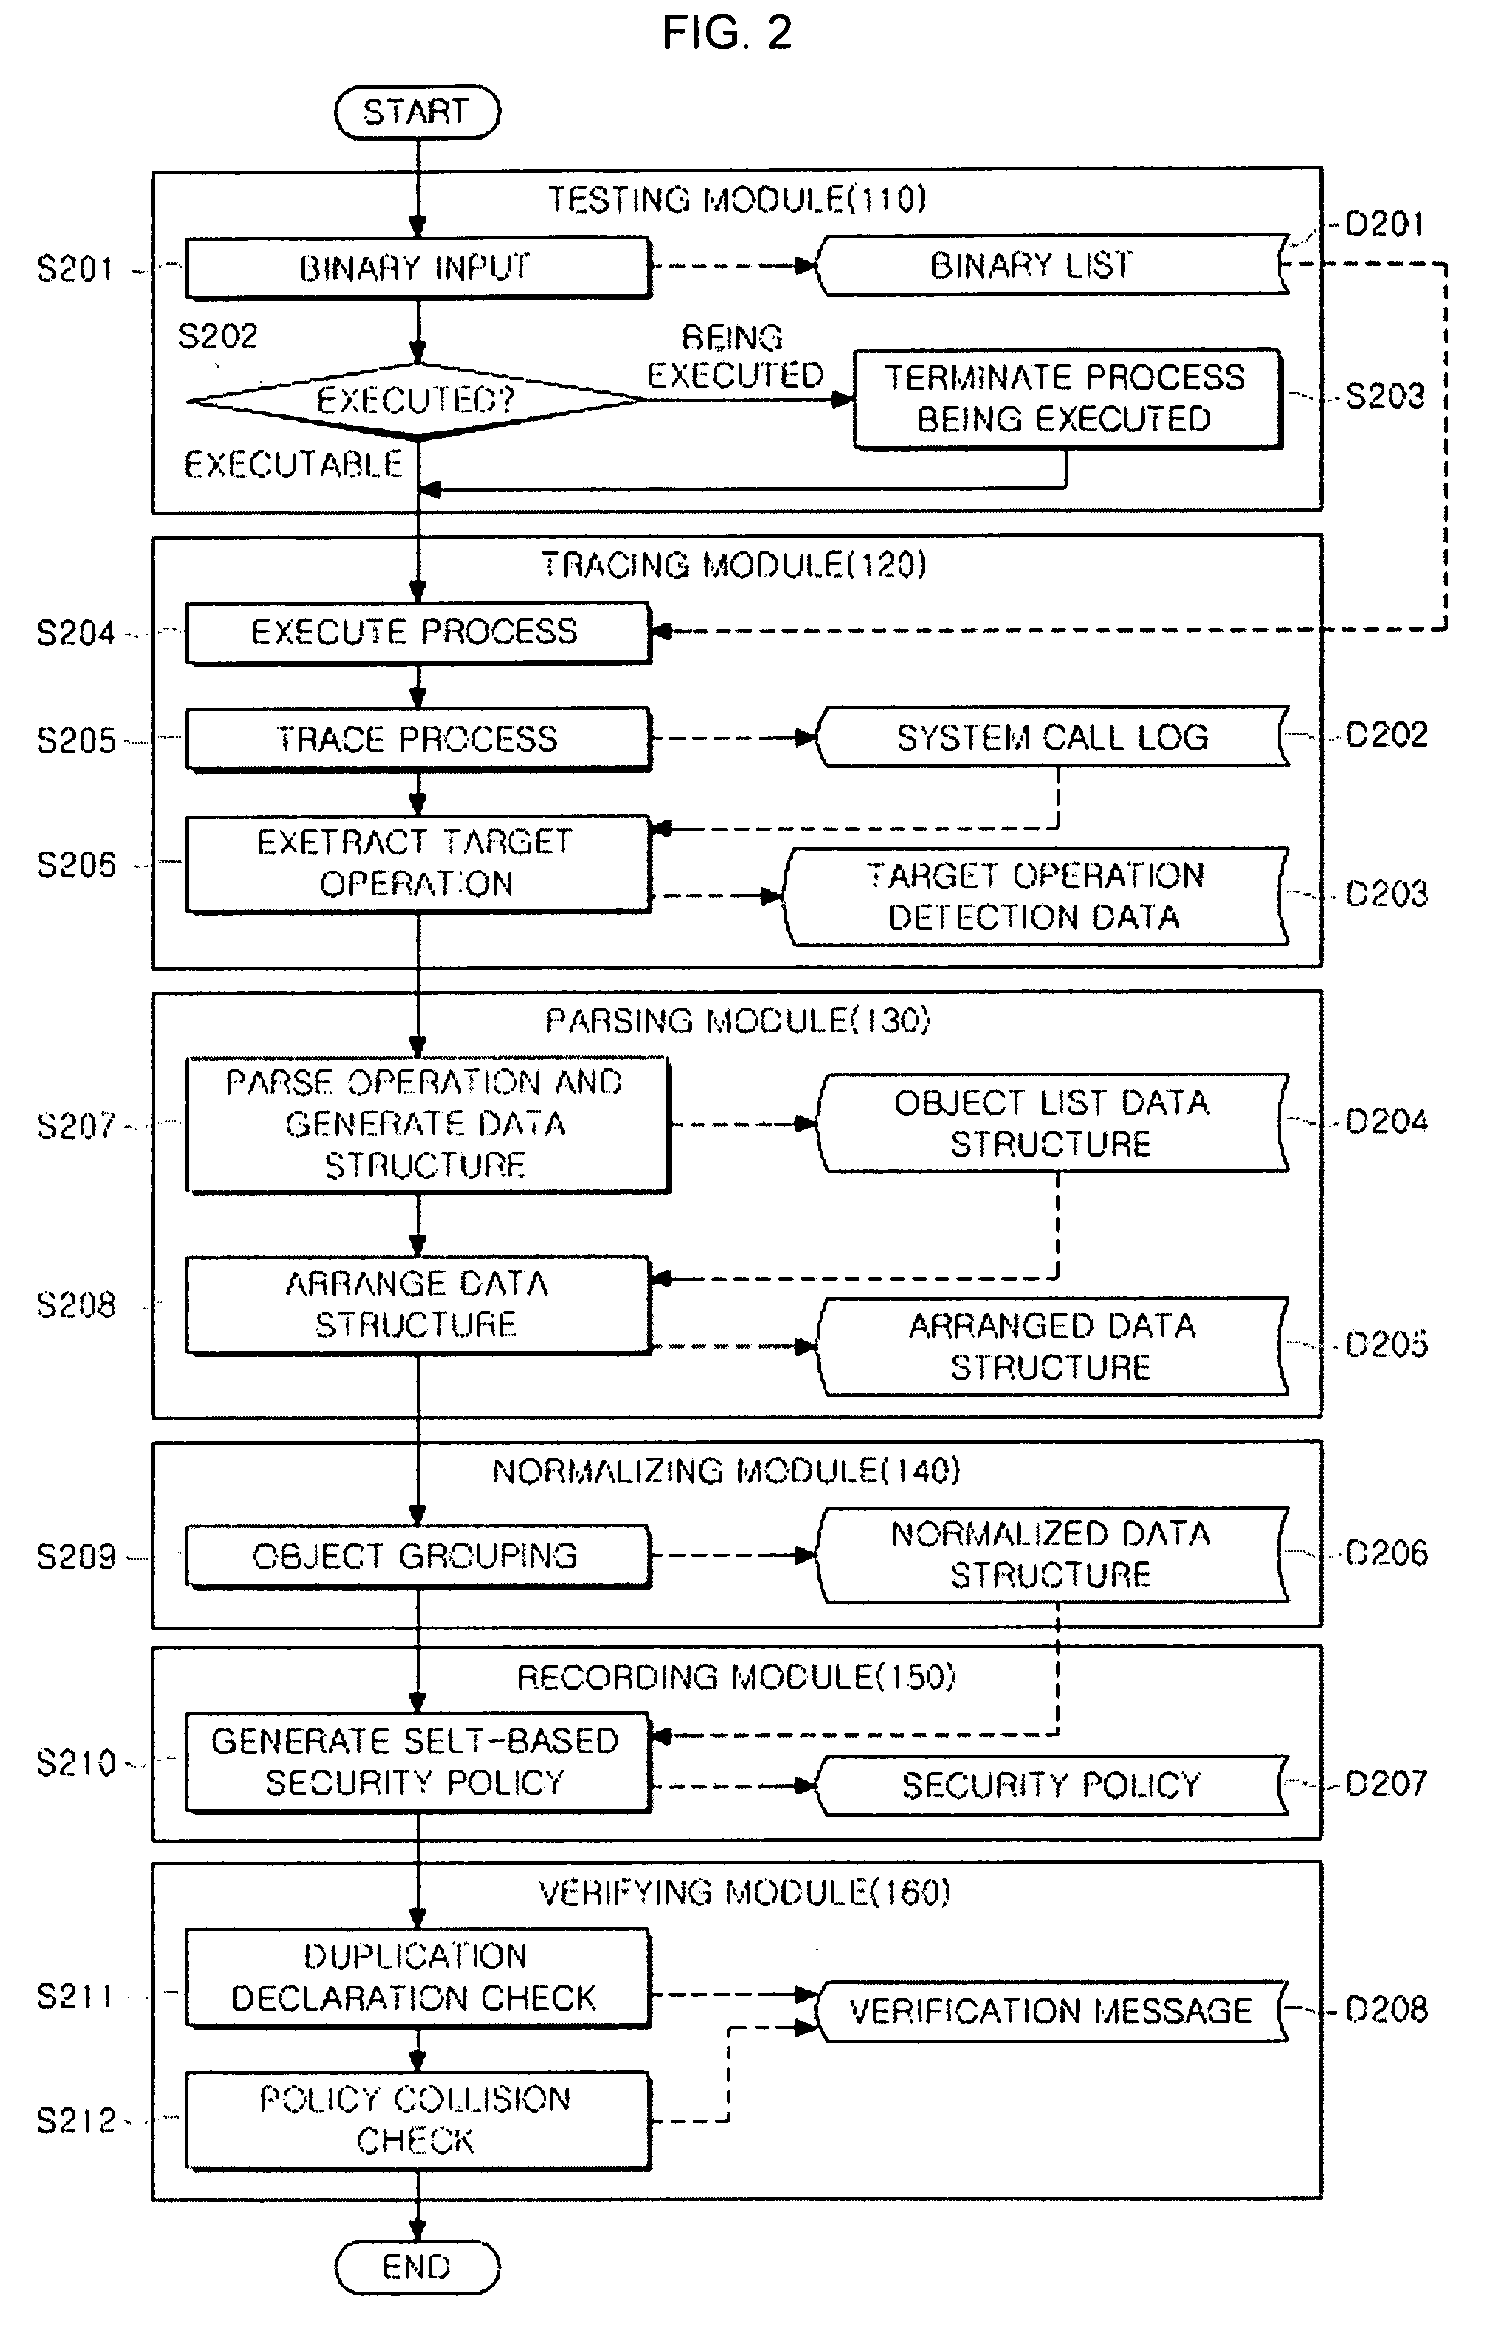 Apparatus and method for automatically generating SELinux security policy based on selt